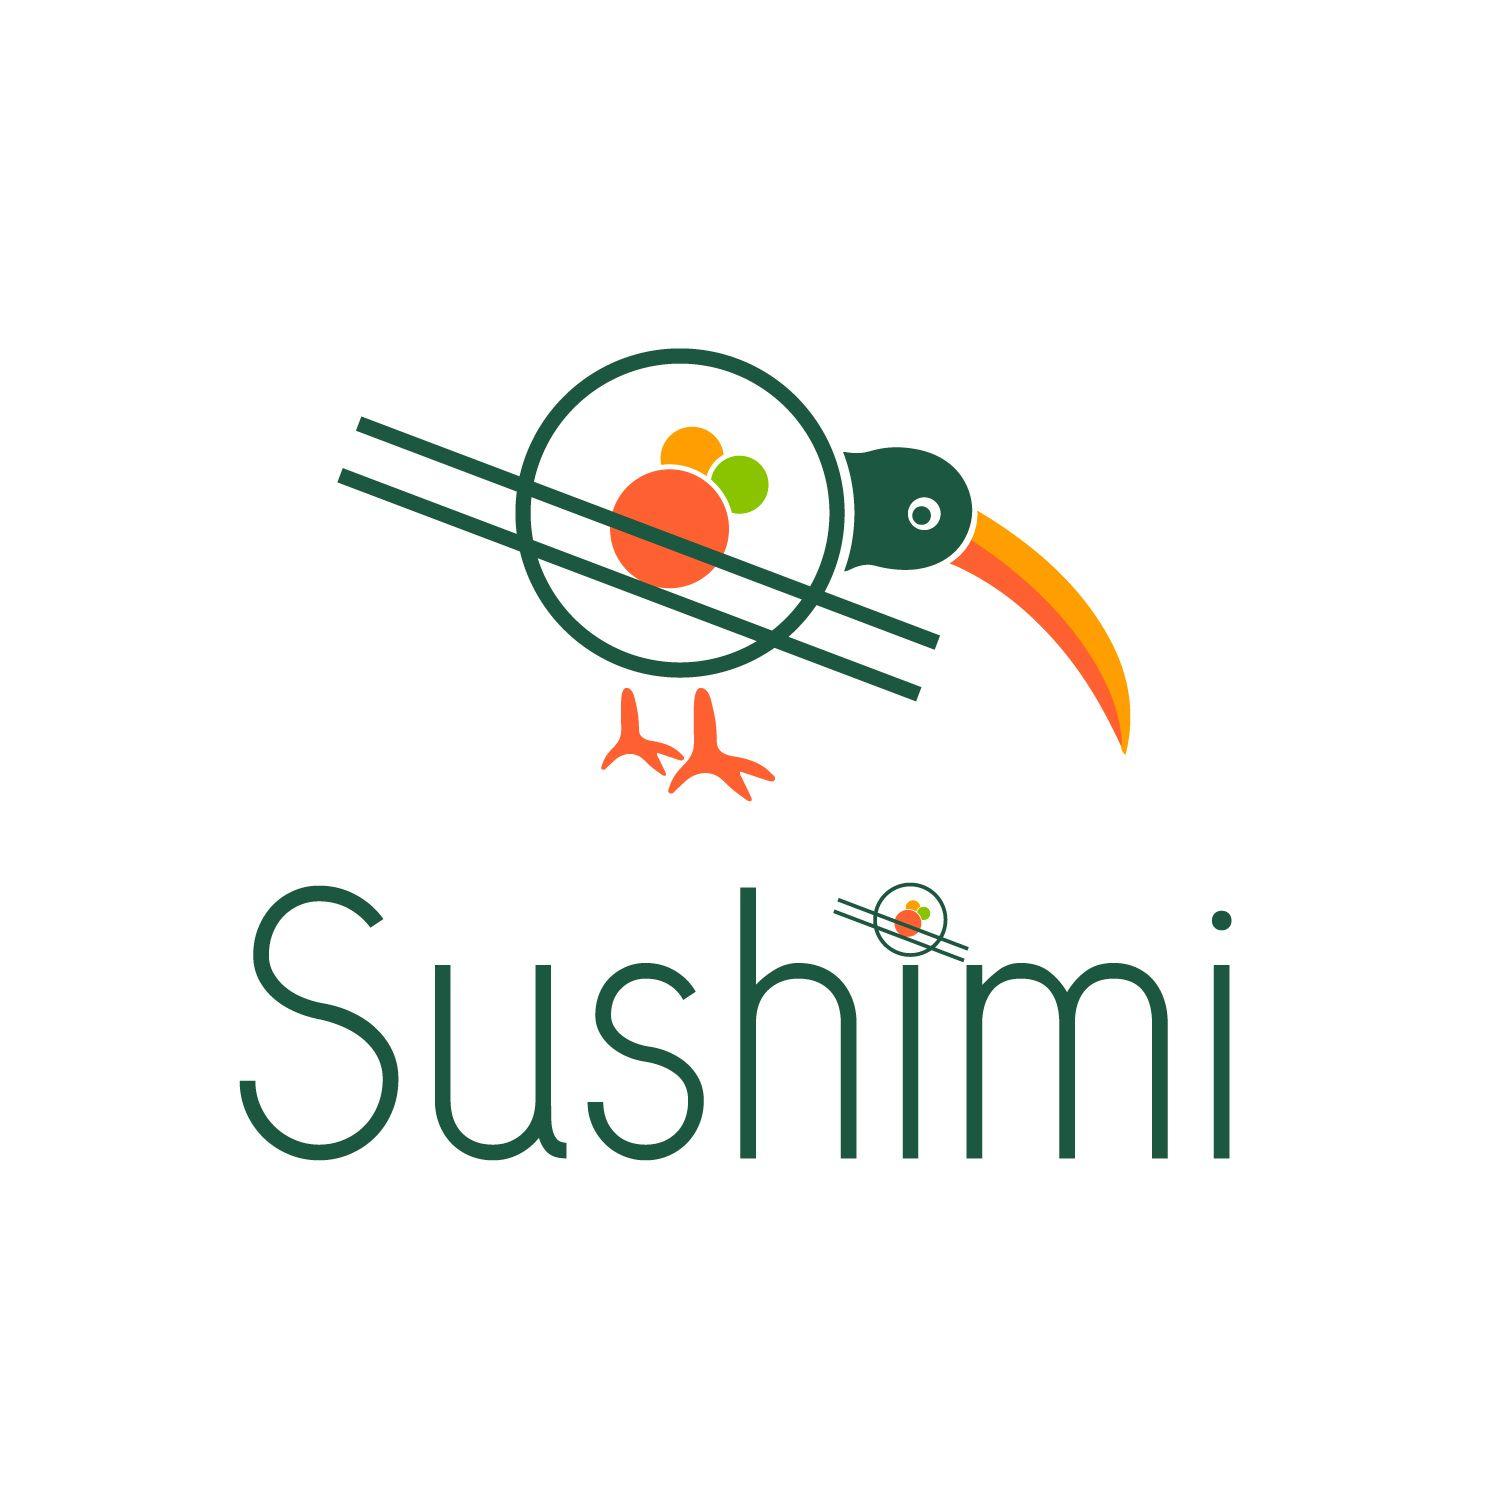 Food Chain Logo - Playful, Personable, Fast Food Chain Logo Design for Sushimi